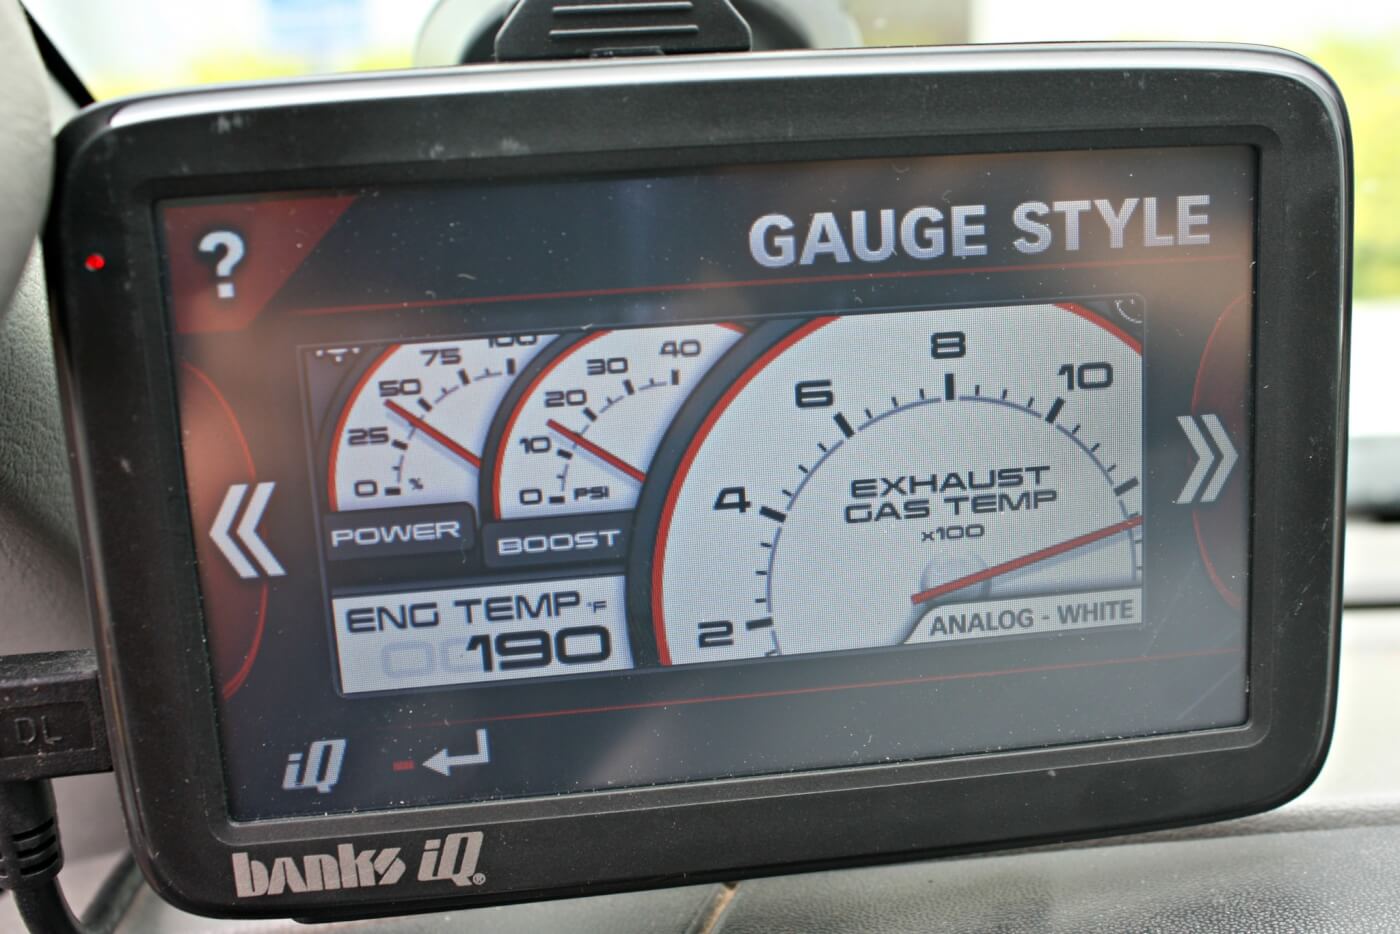 14. The iQ has multiple one-of-a-kind gauge displays you can choose from depending on your own preferences: The white face analog gauges give that old-school look with the new-school technology. You can also select the background colors or watch a Fuel Mileage Calculator screen to help monitor mileage driven, price per gallon, estimated mileage, and cost per mile.